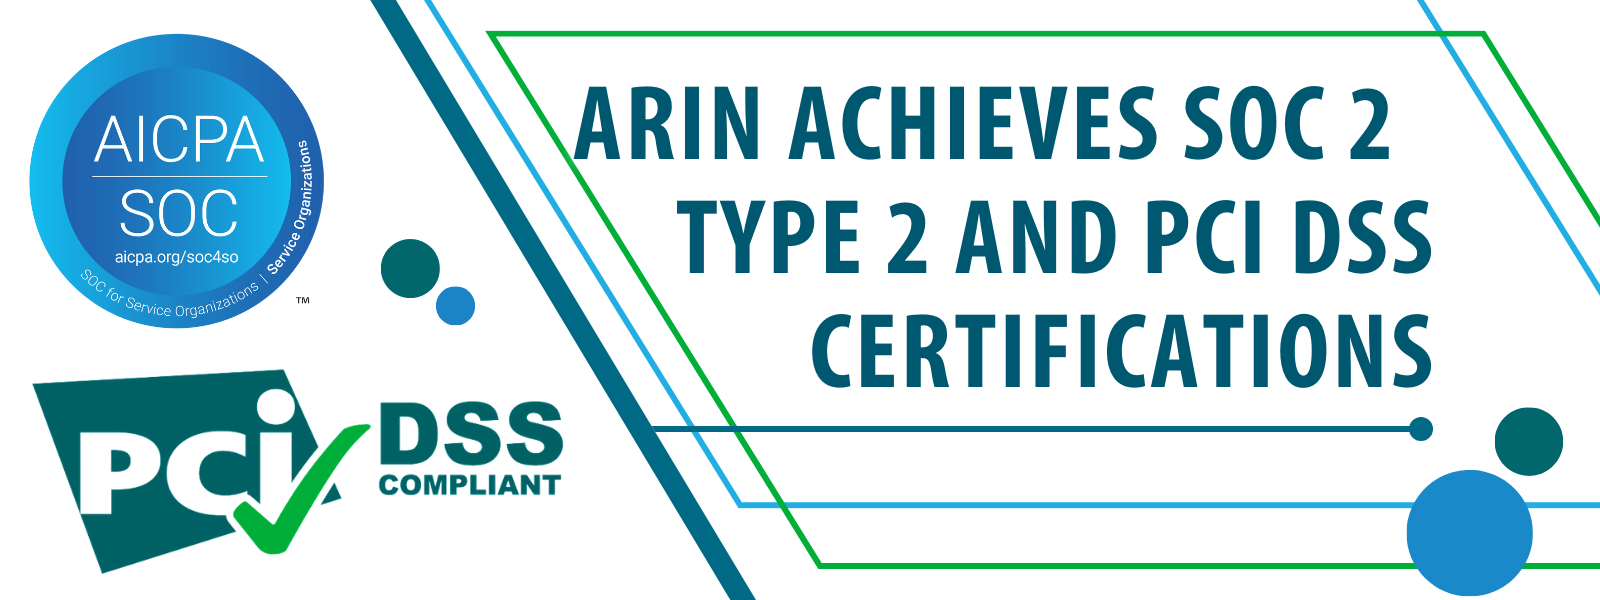 ARIN achieves SOC 2 Type 2 and PCI DSS certifications